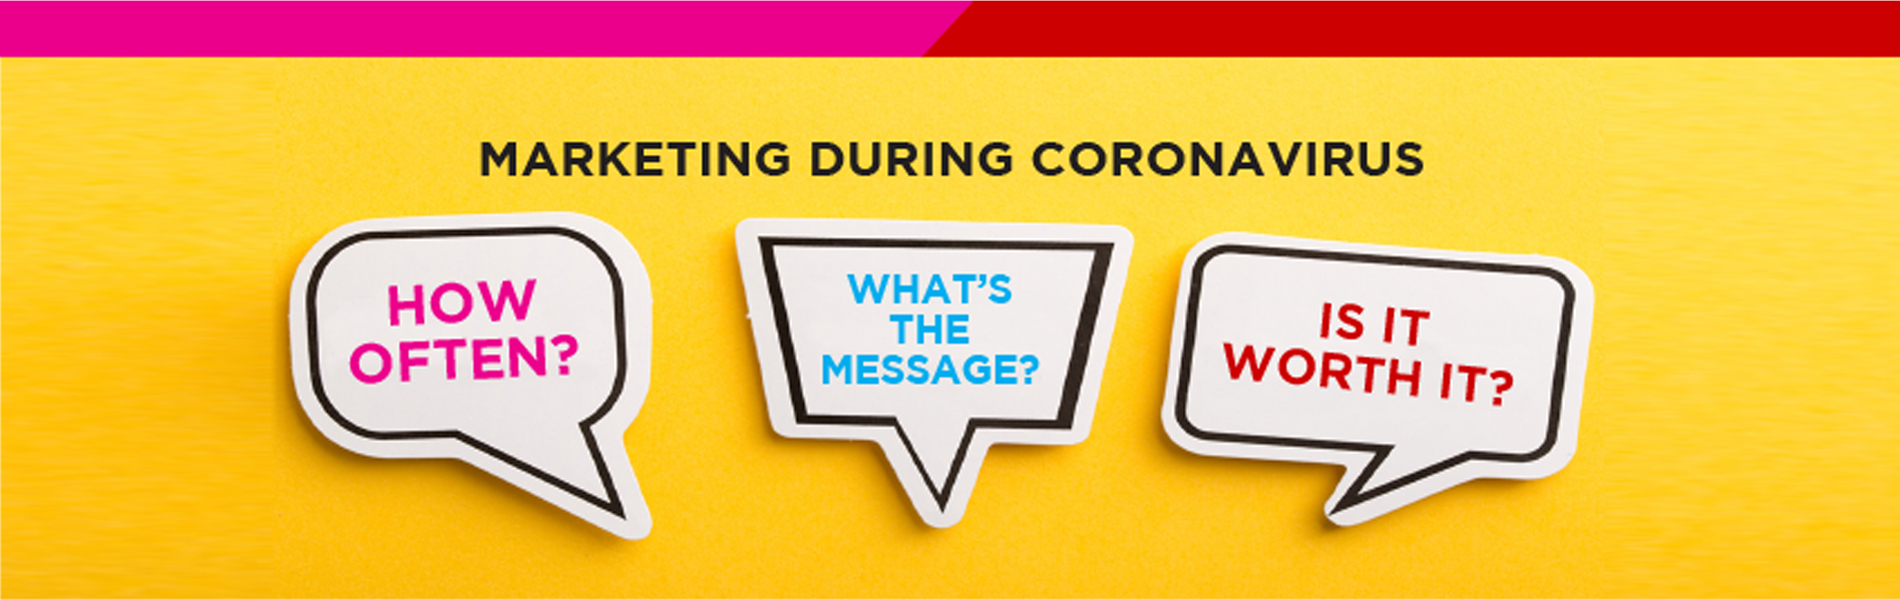 Yellow background, with copy: "Marketing During Coronavirus" with 3 speech bubbles. #1 "How Often?" #2: "What's the Message?"  #3: "Is it worth it?" Then, "Asking the right questions. Download a white paper on "Should you adjust your marketing strategy?"